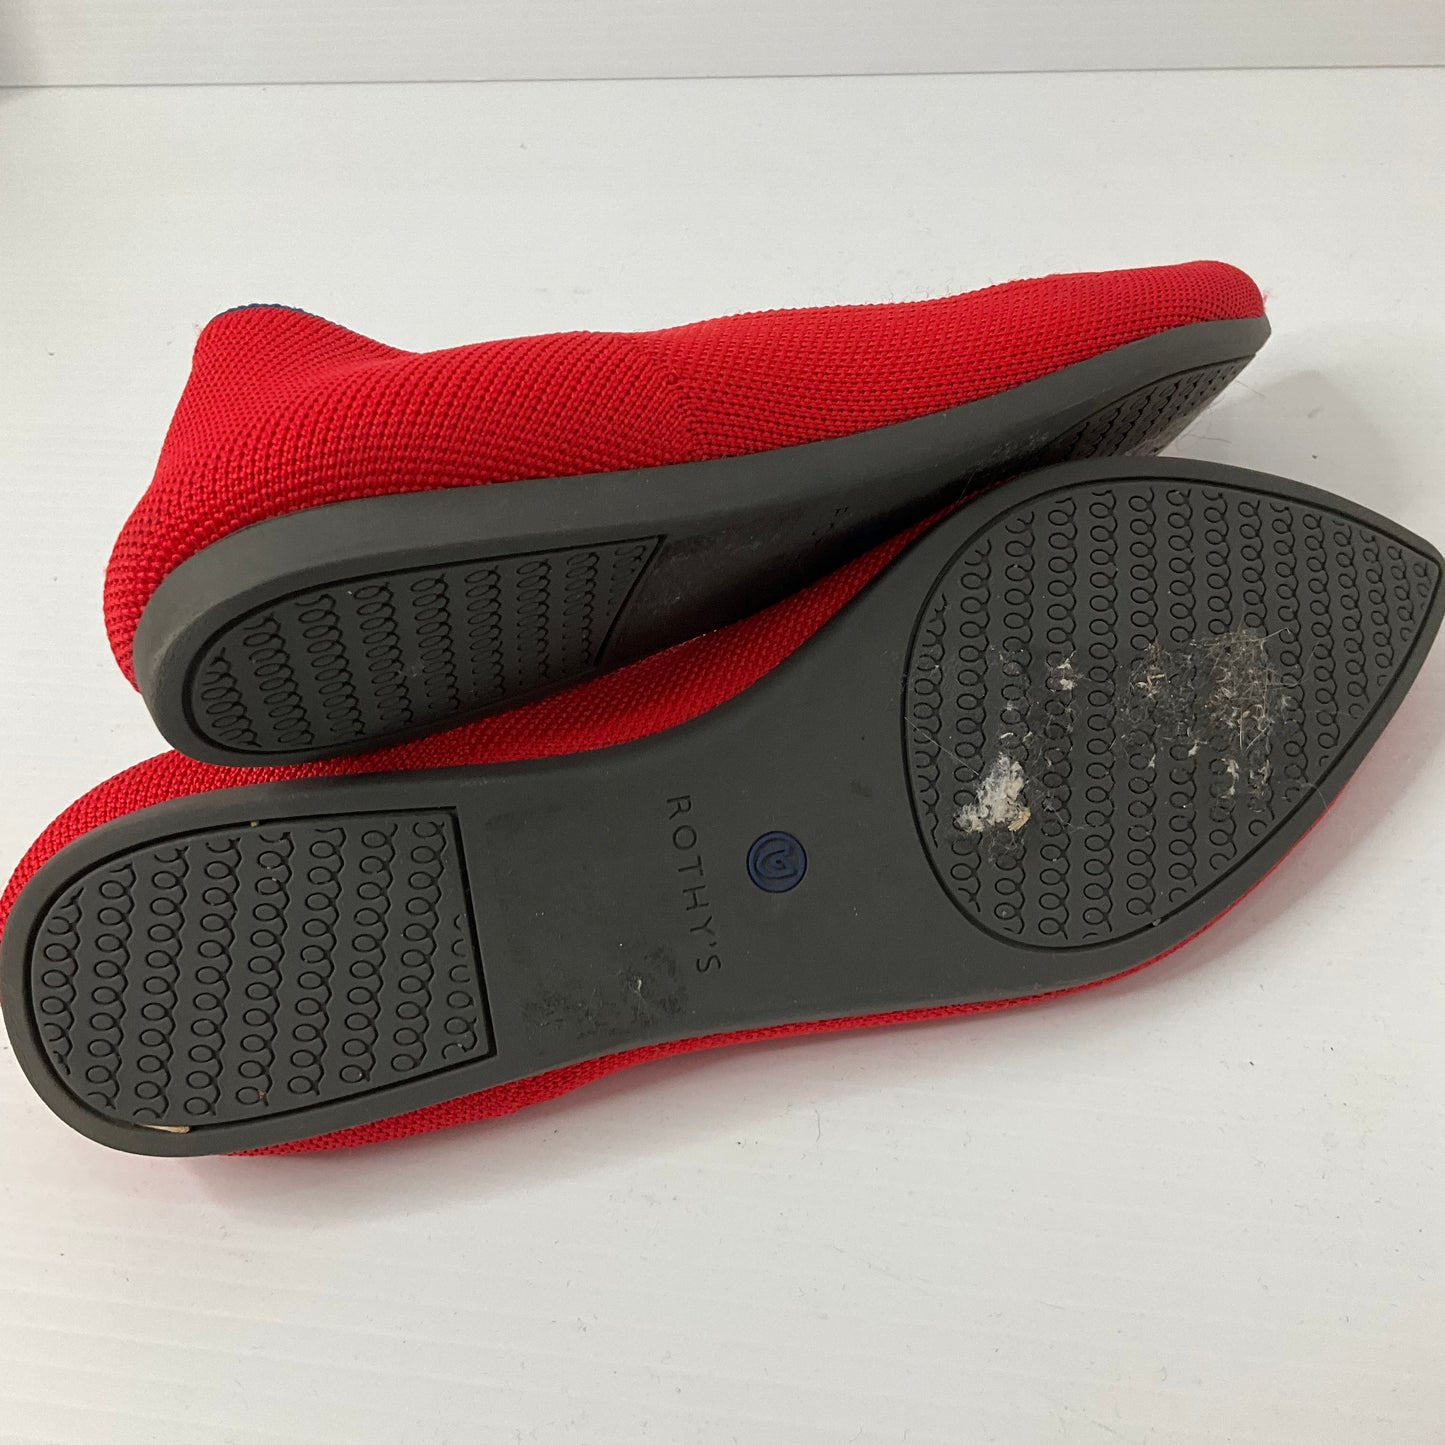 Red Shoes Flats Rothys, Size 6